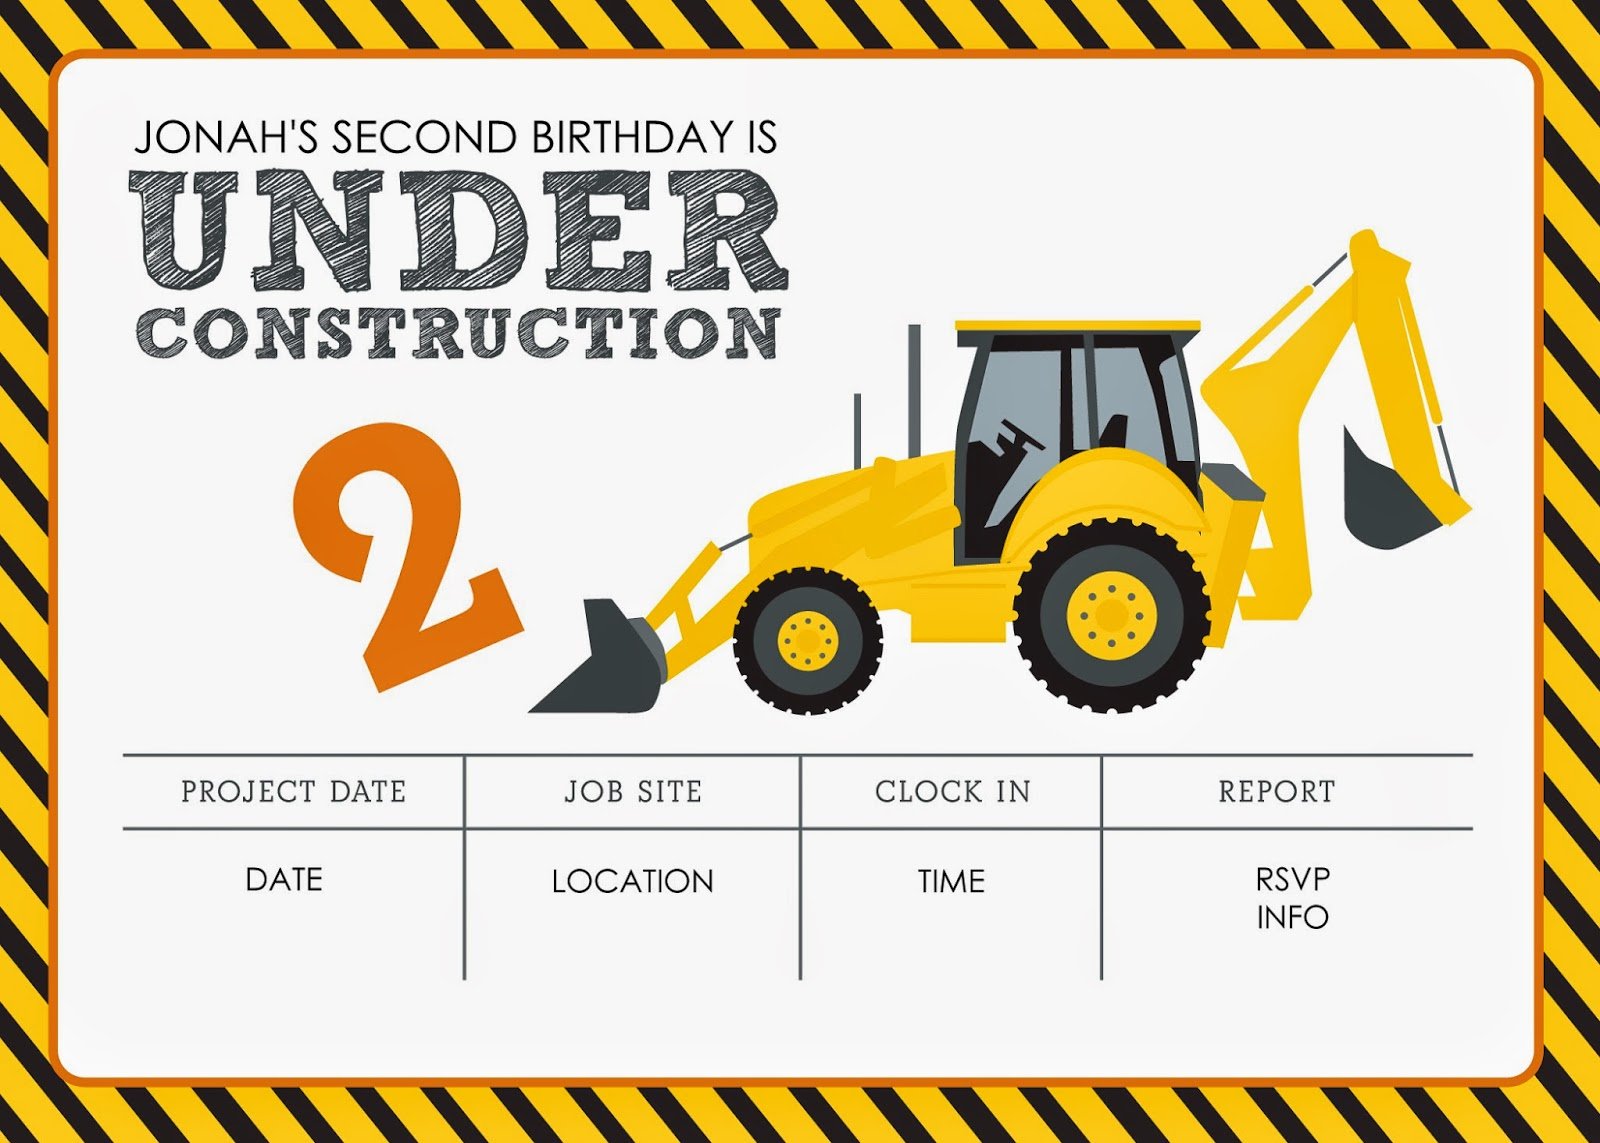 17+ Ideas About Construction Party Invitations On Pinterest